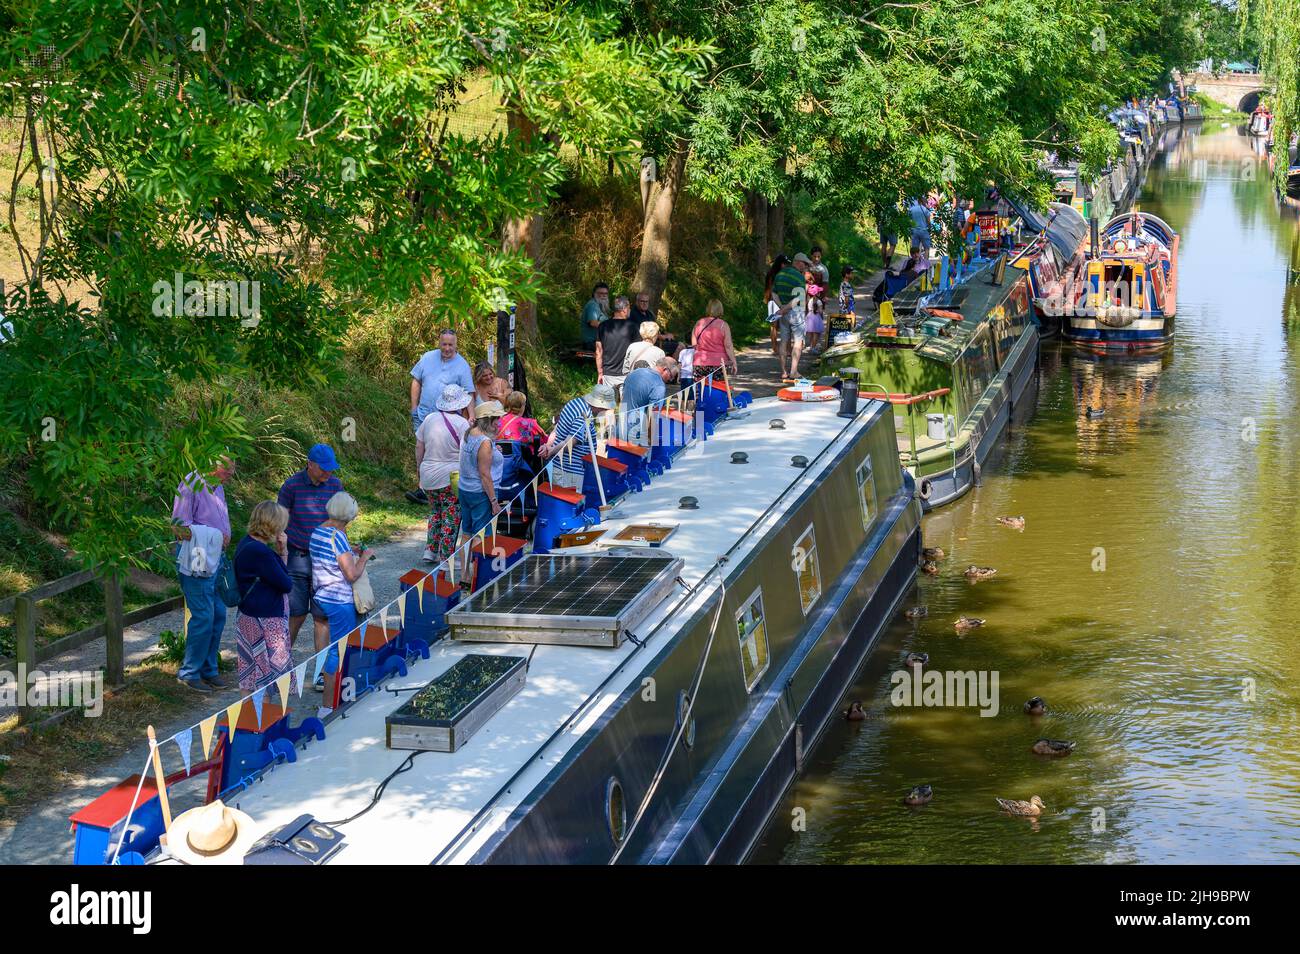 Visitors enjoying a canal festival in the village of Gnosall in Staffordshire during a heatwave. Stock Photo